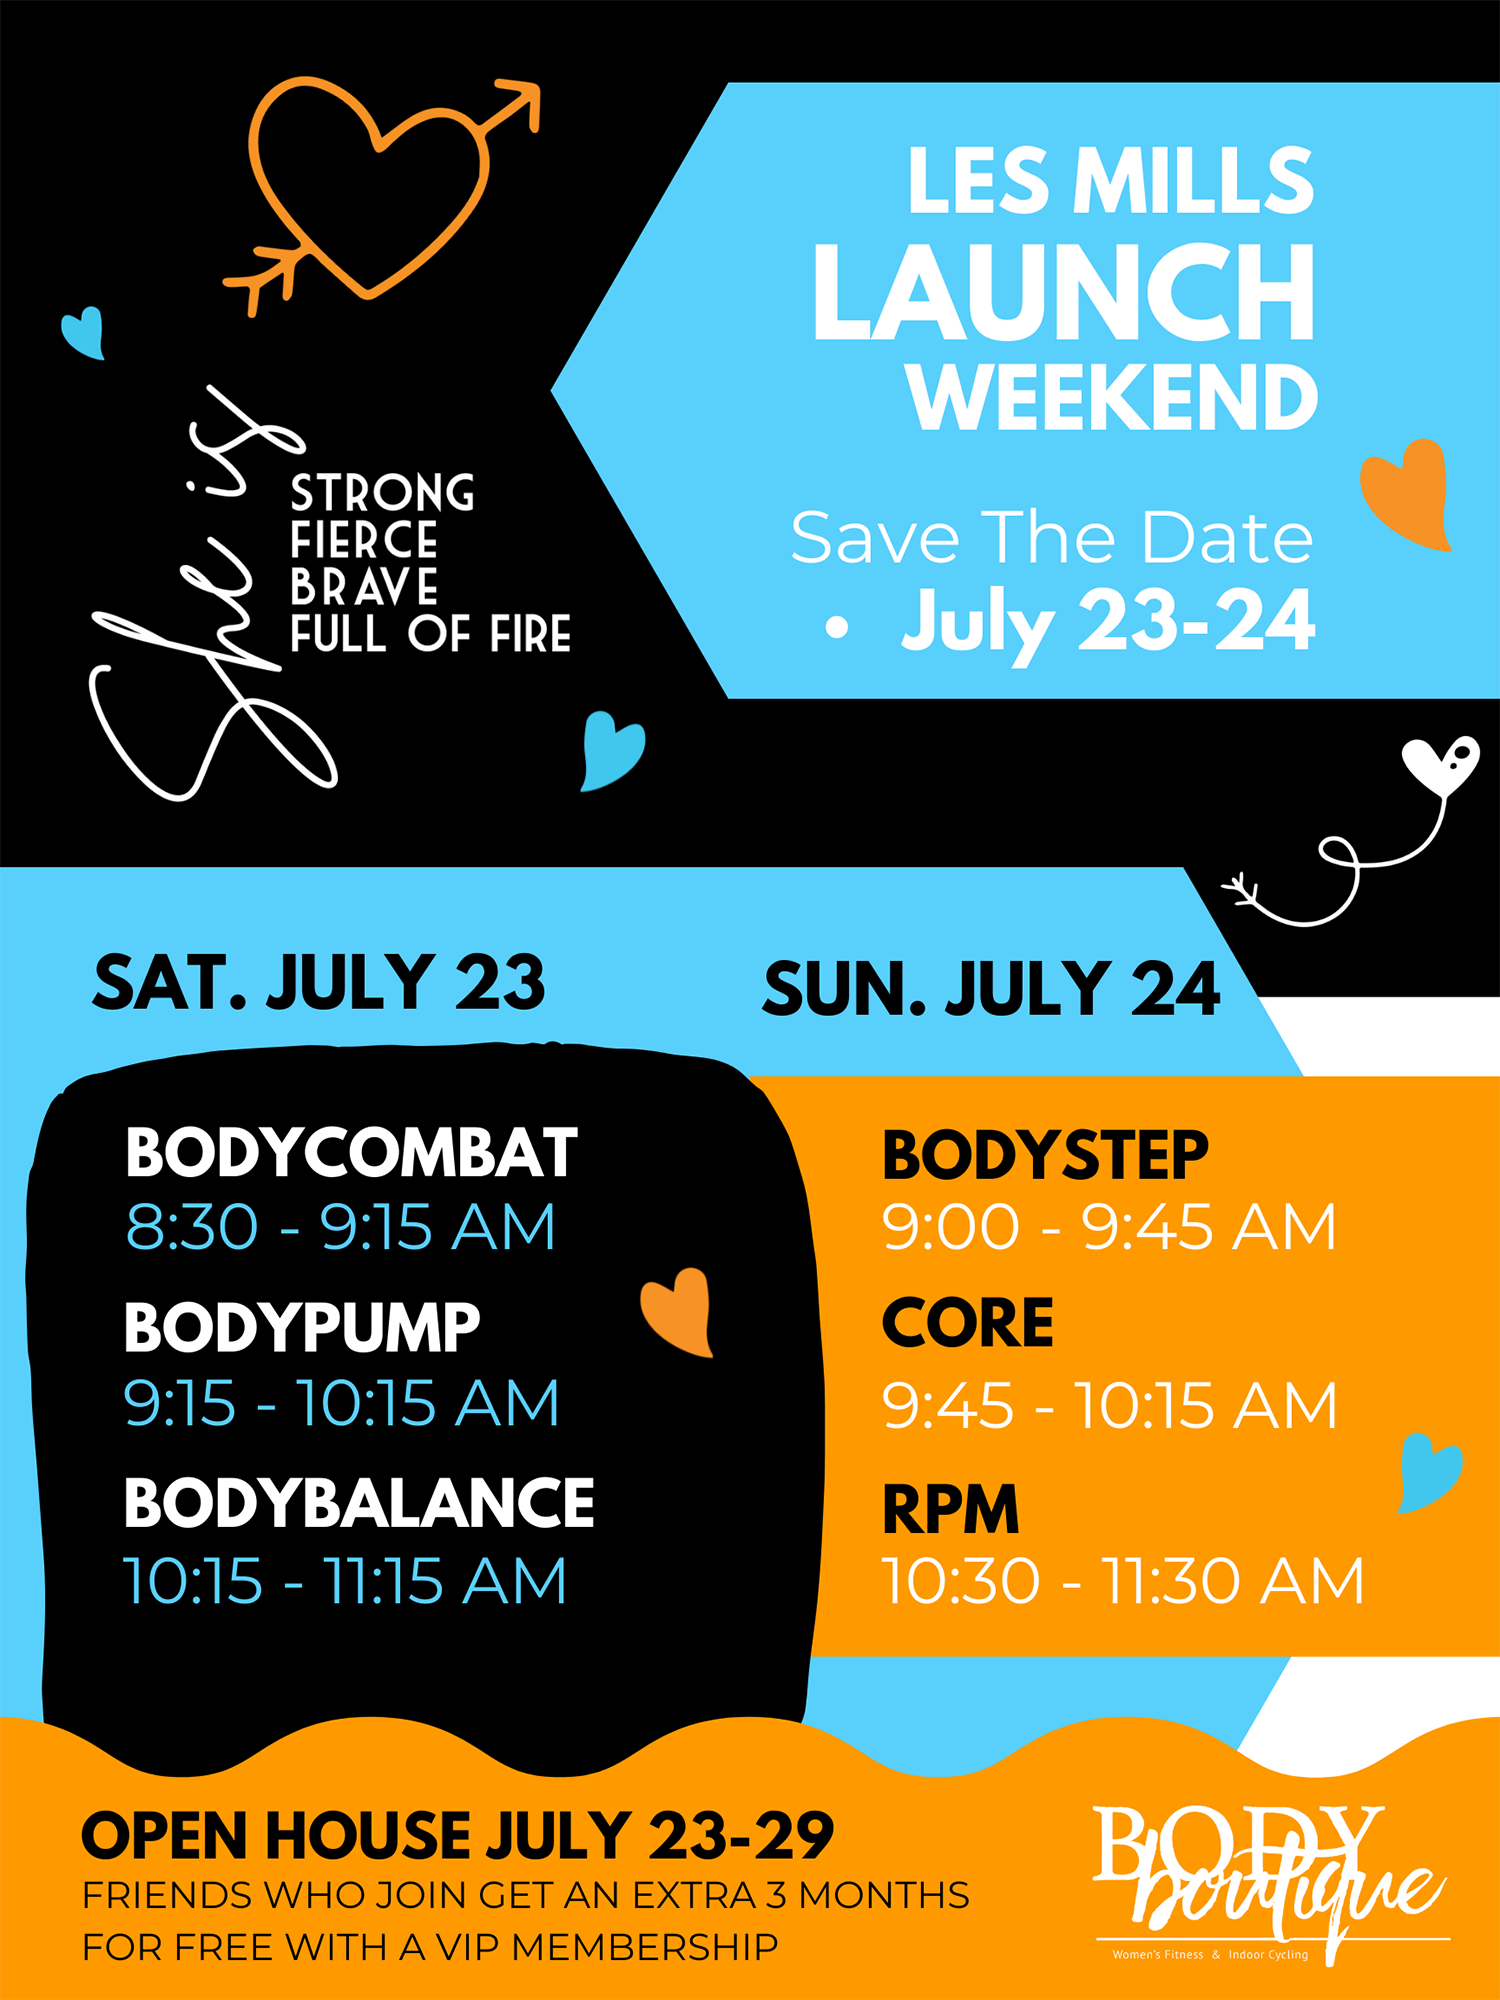 Les Mills Class Launch and Open House Week